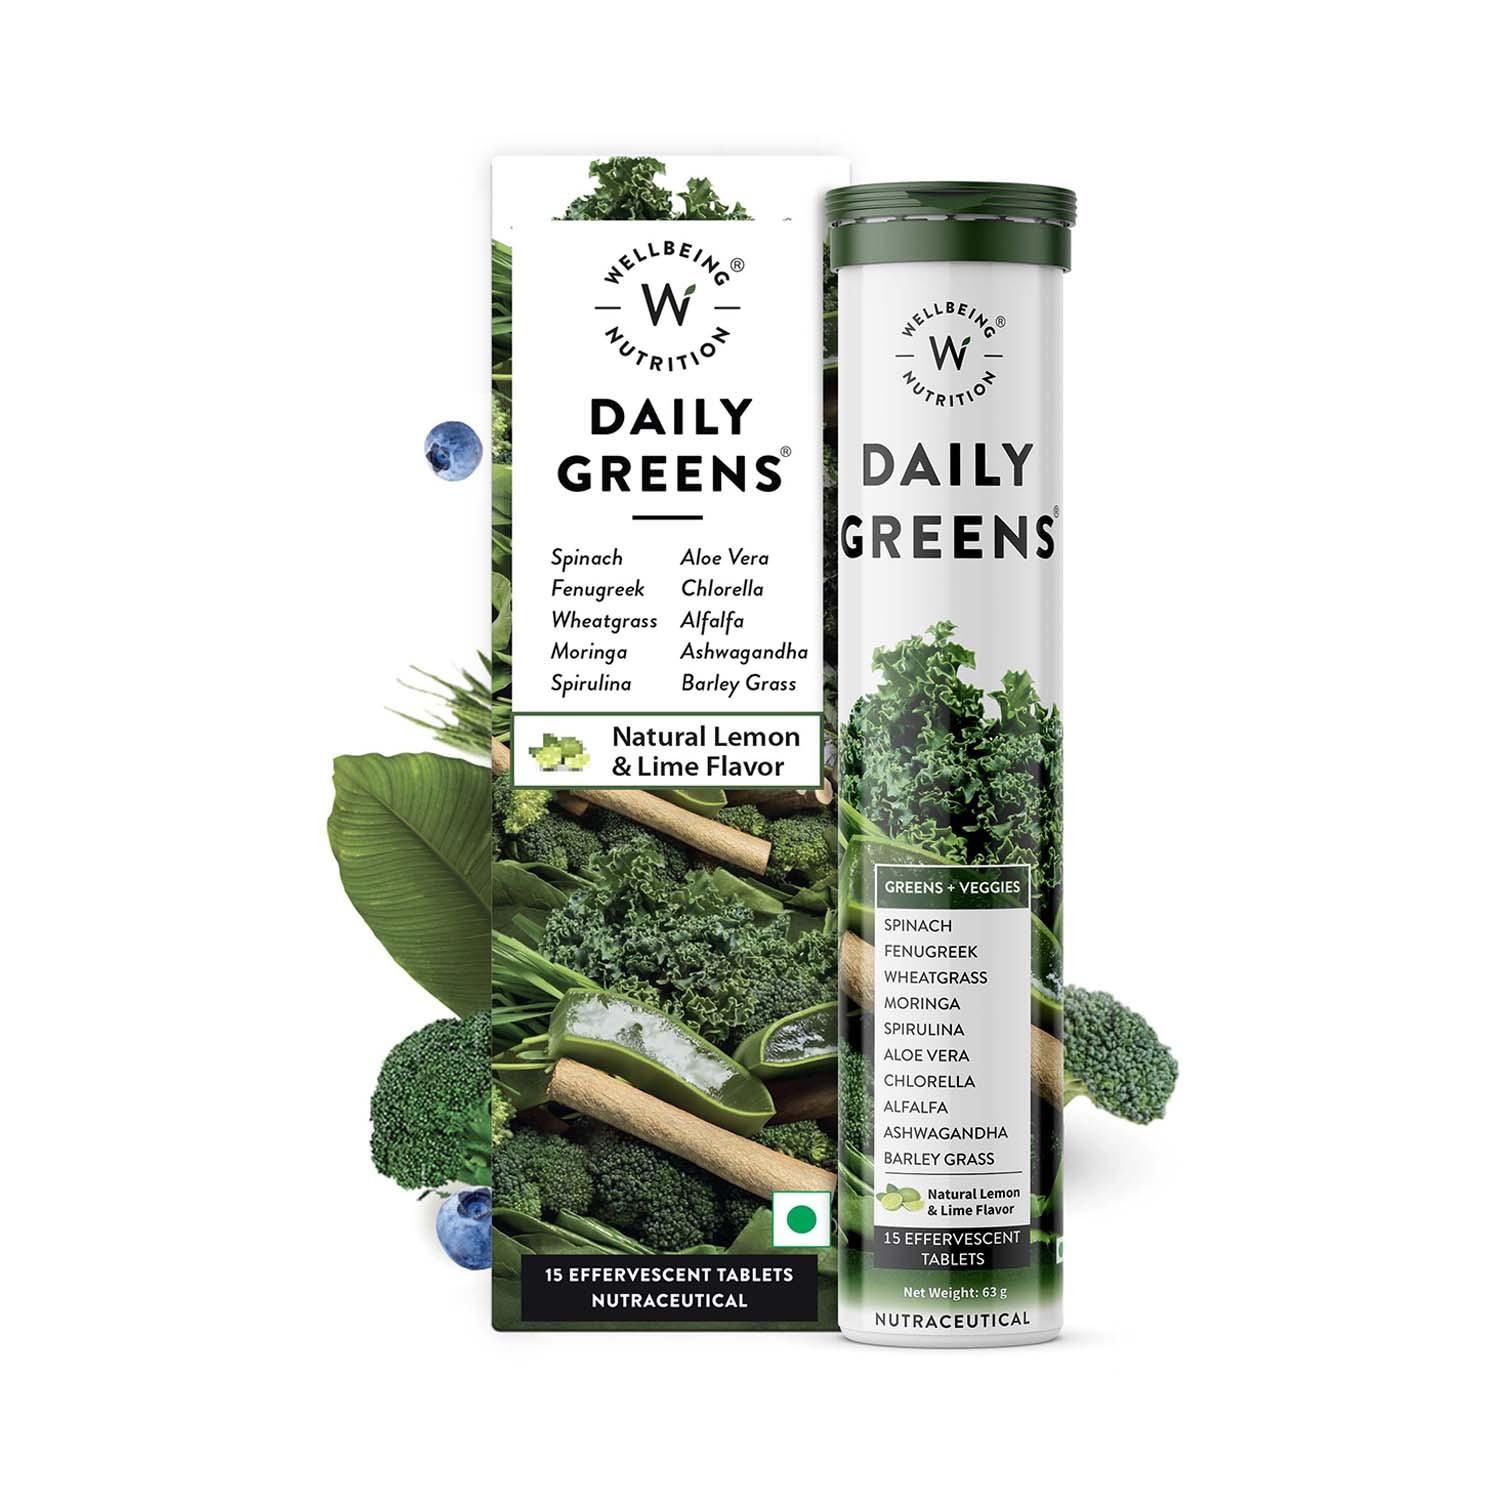 Wellbeing Nutrition | Wellbeing Nutrition Daily Greens Wholefood Multivitamin with Vitamin C, Zinc, B6, B12 for Immunity and Detox